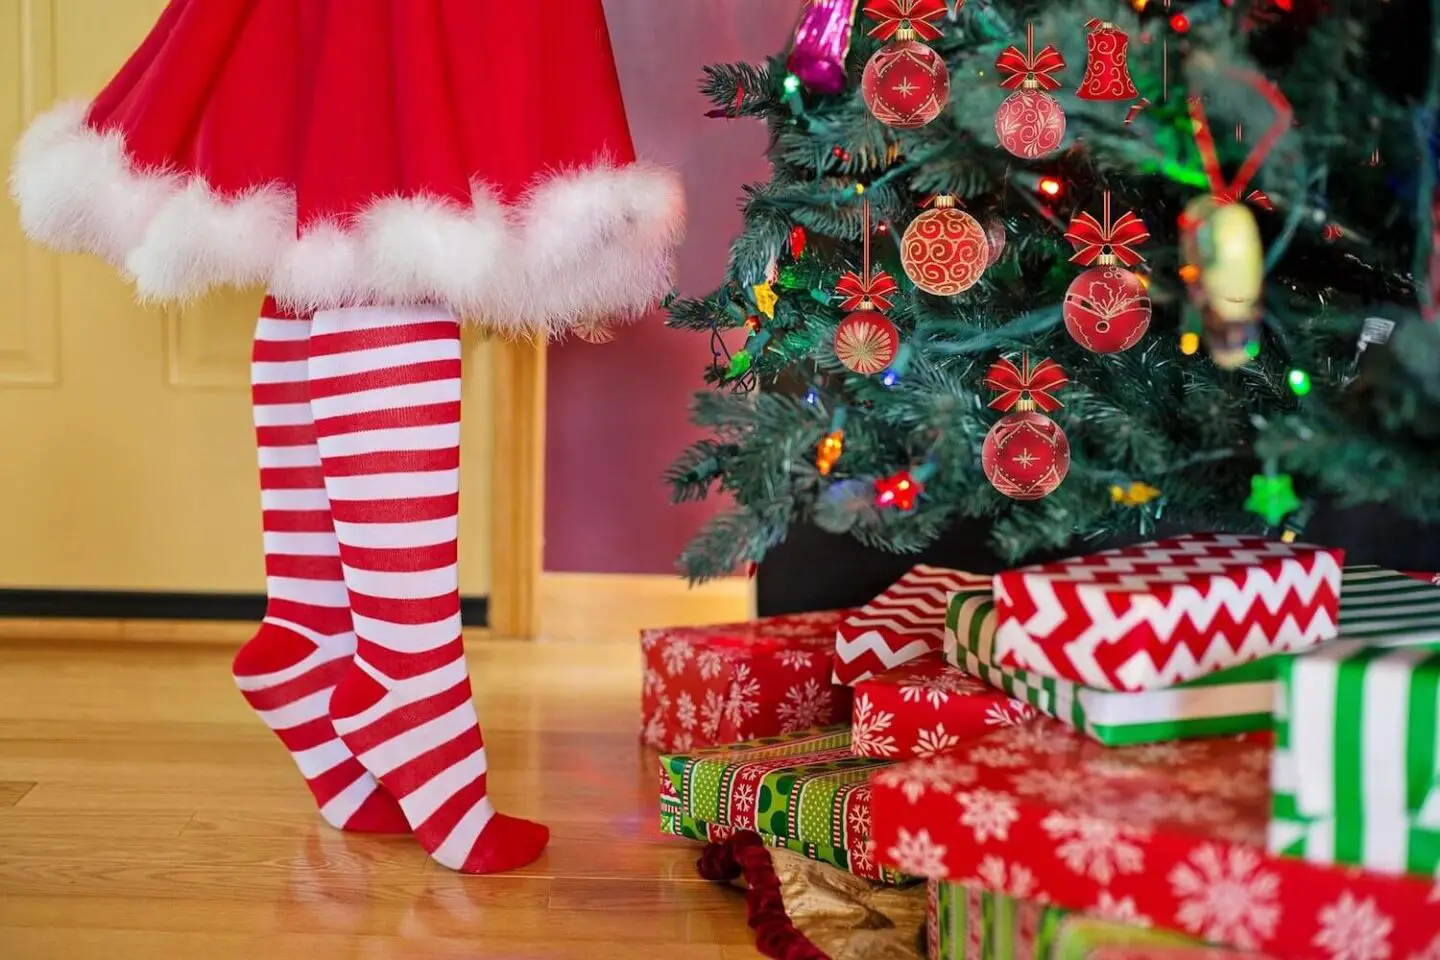 Mrs Claus legs on tiptoe next to a Christmas tree with presents underneath.